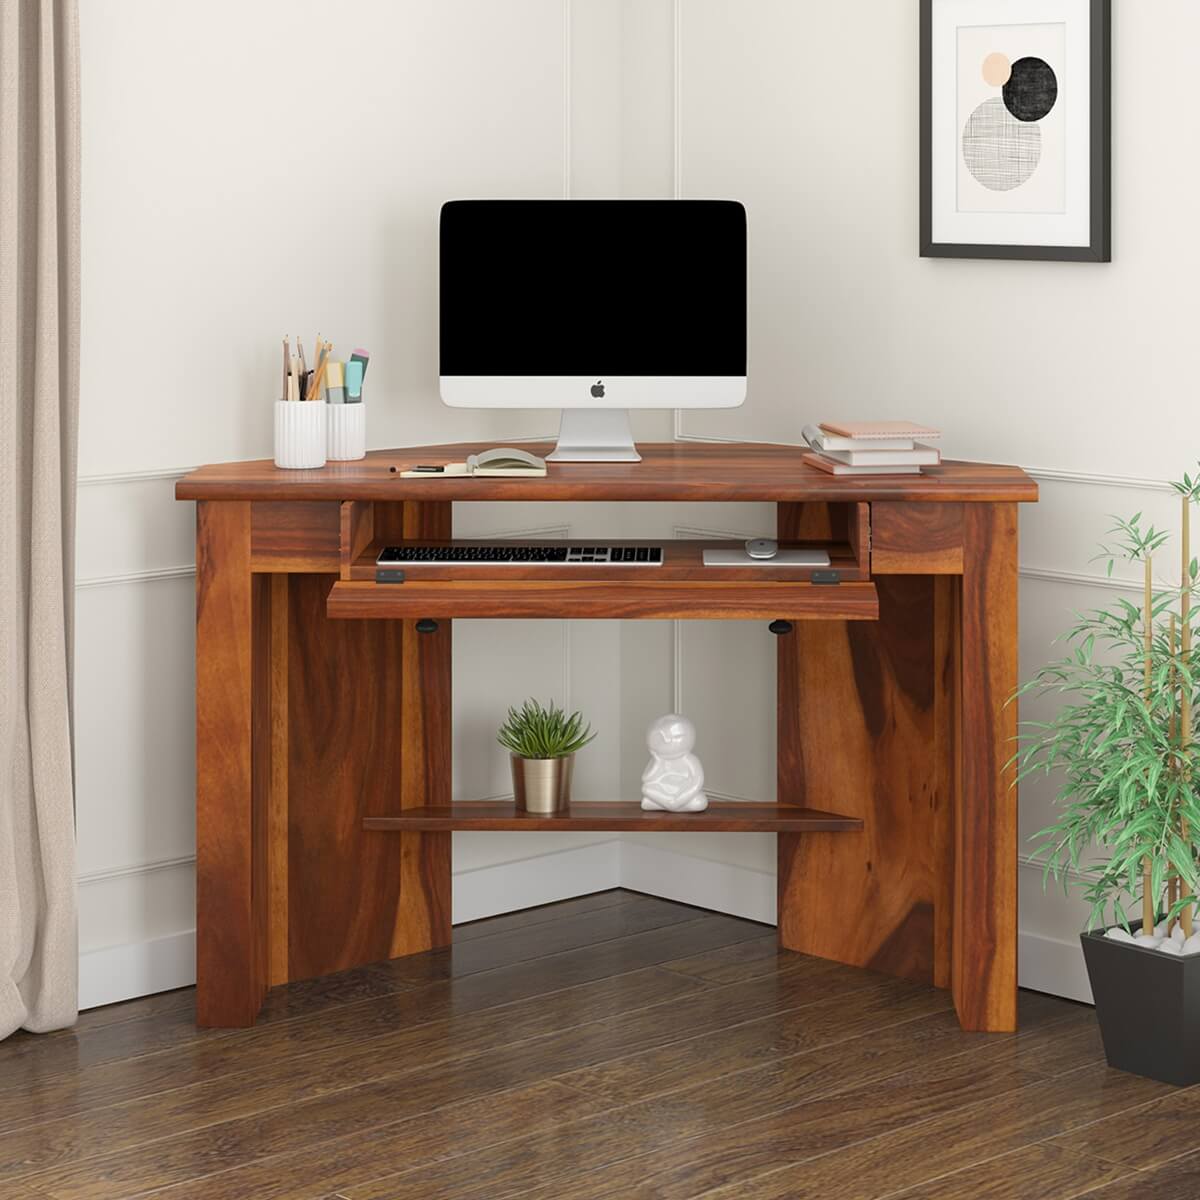 https://www.sierralivingconcepts.com/images/thumbs/0405720_lathrop-solid-wood-contemporary-corner-computer-desk-w-keyboard-tray.jpeg